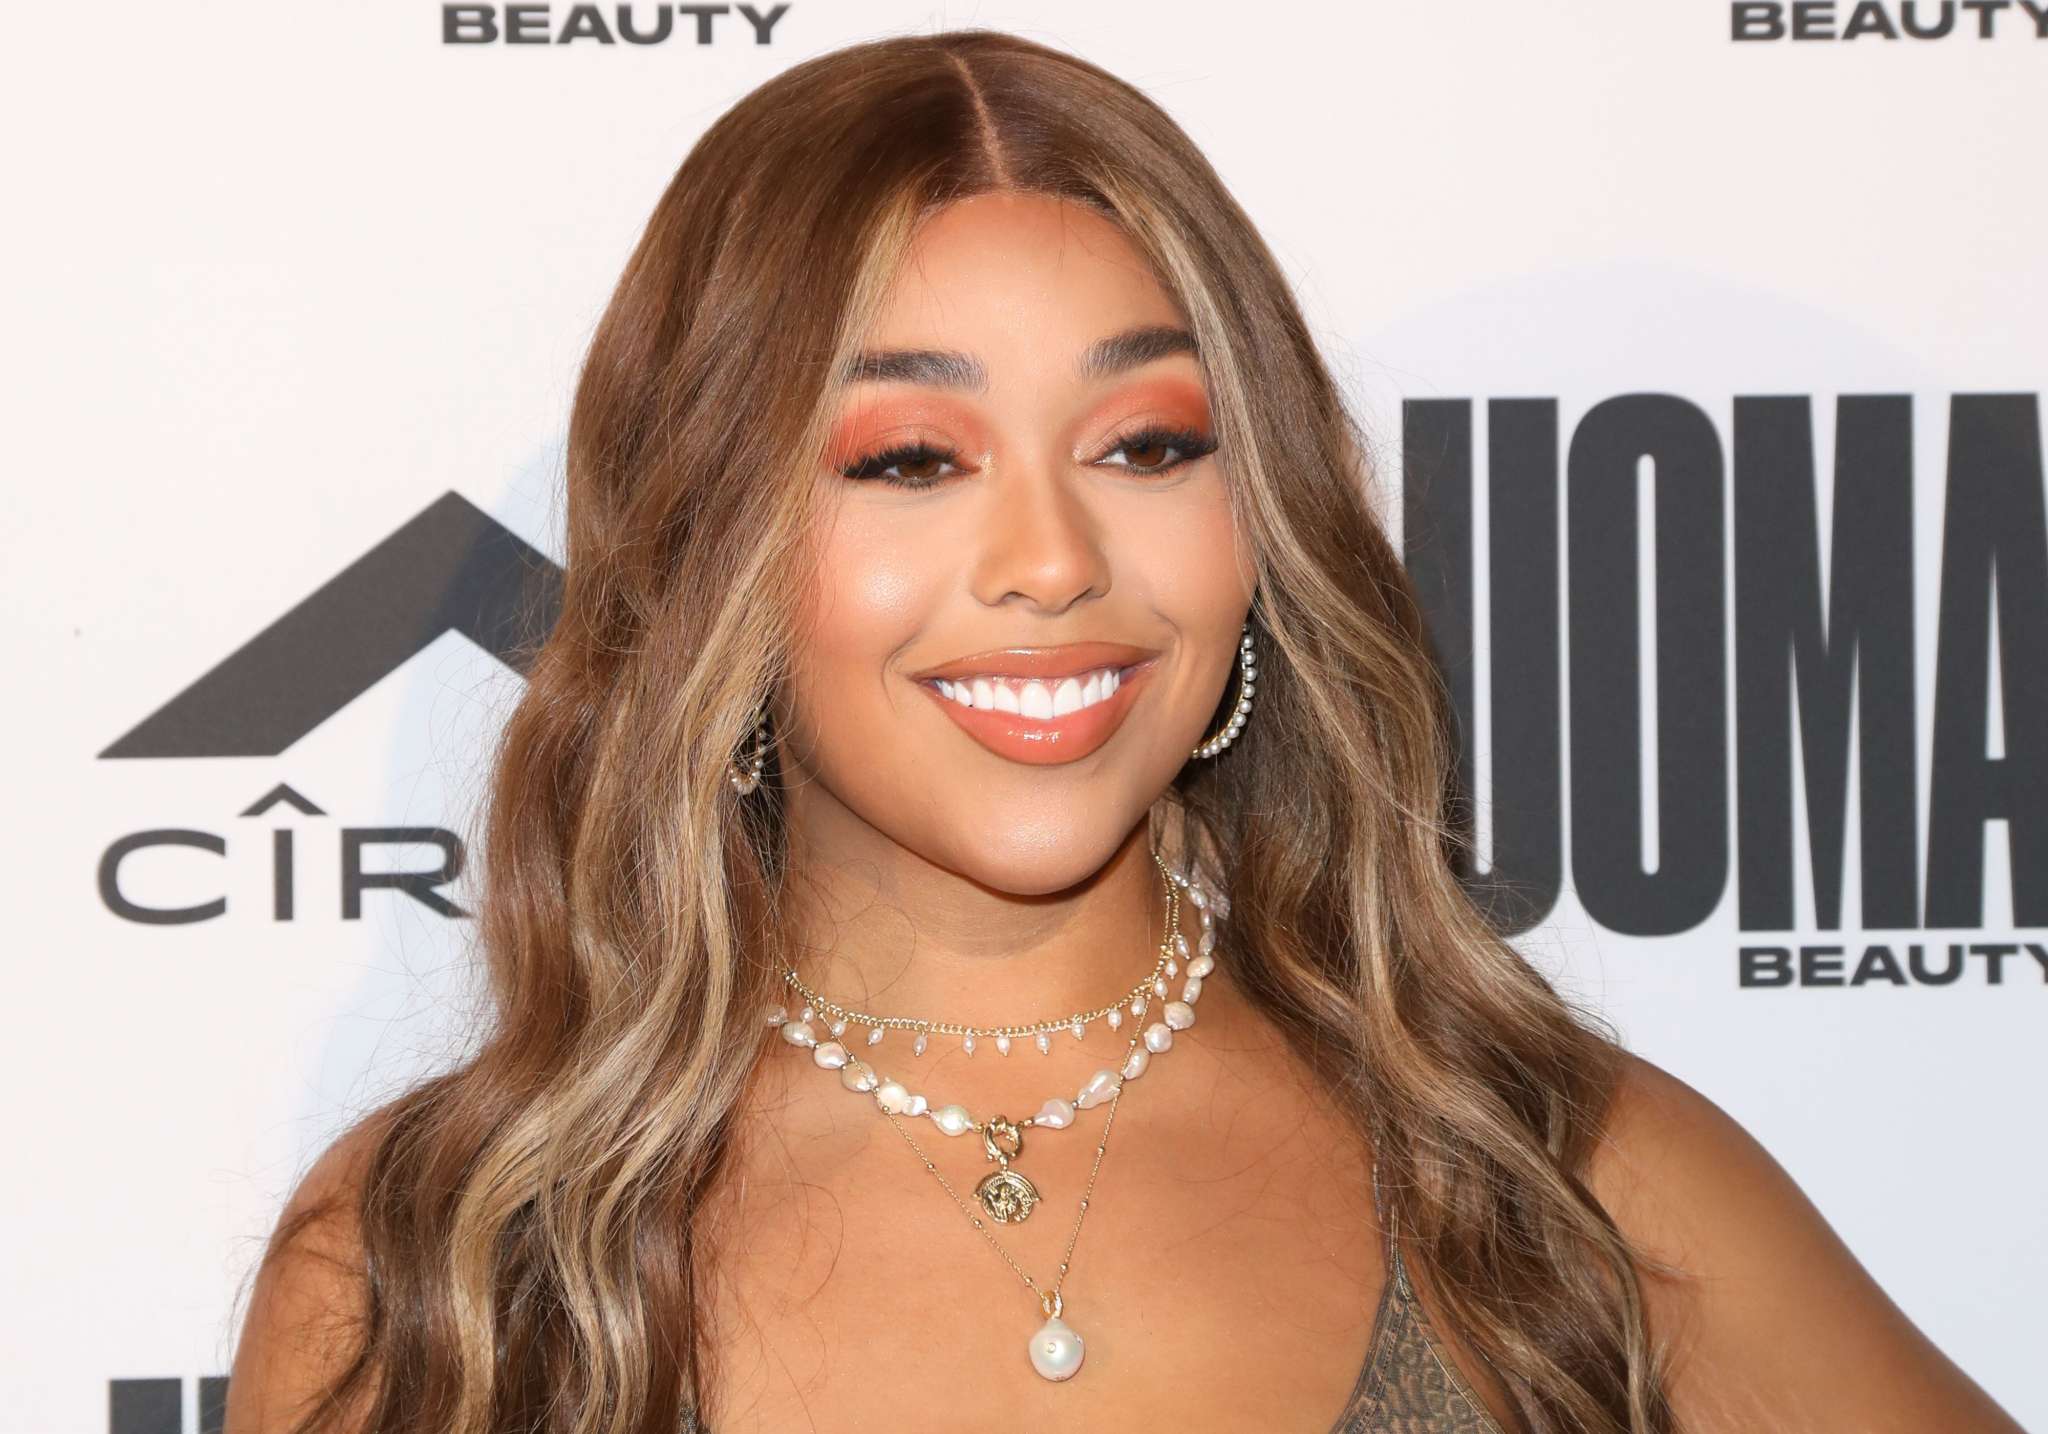 ”jordyn-woods-shares-her-beauty-routine-and-fans-are-in-awe”